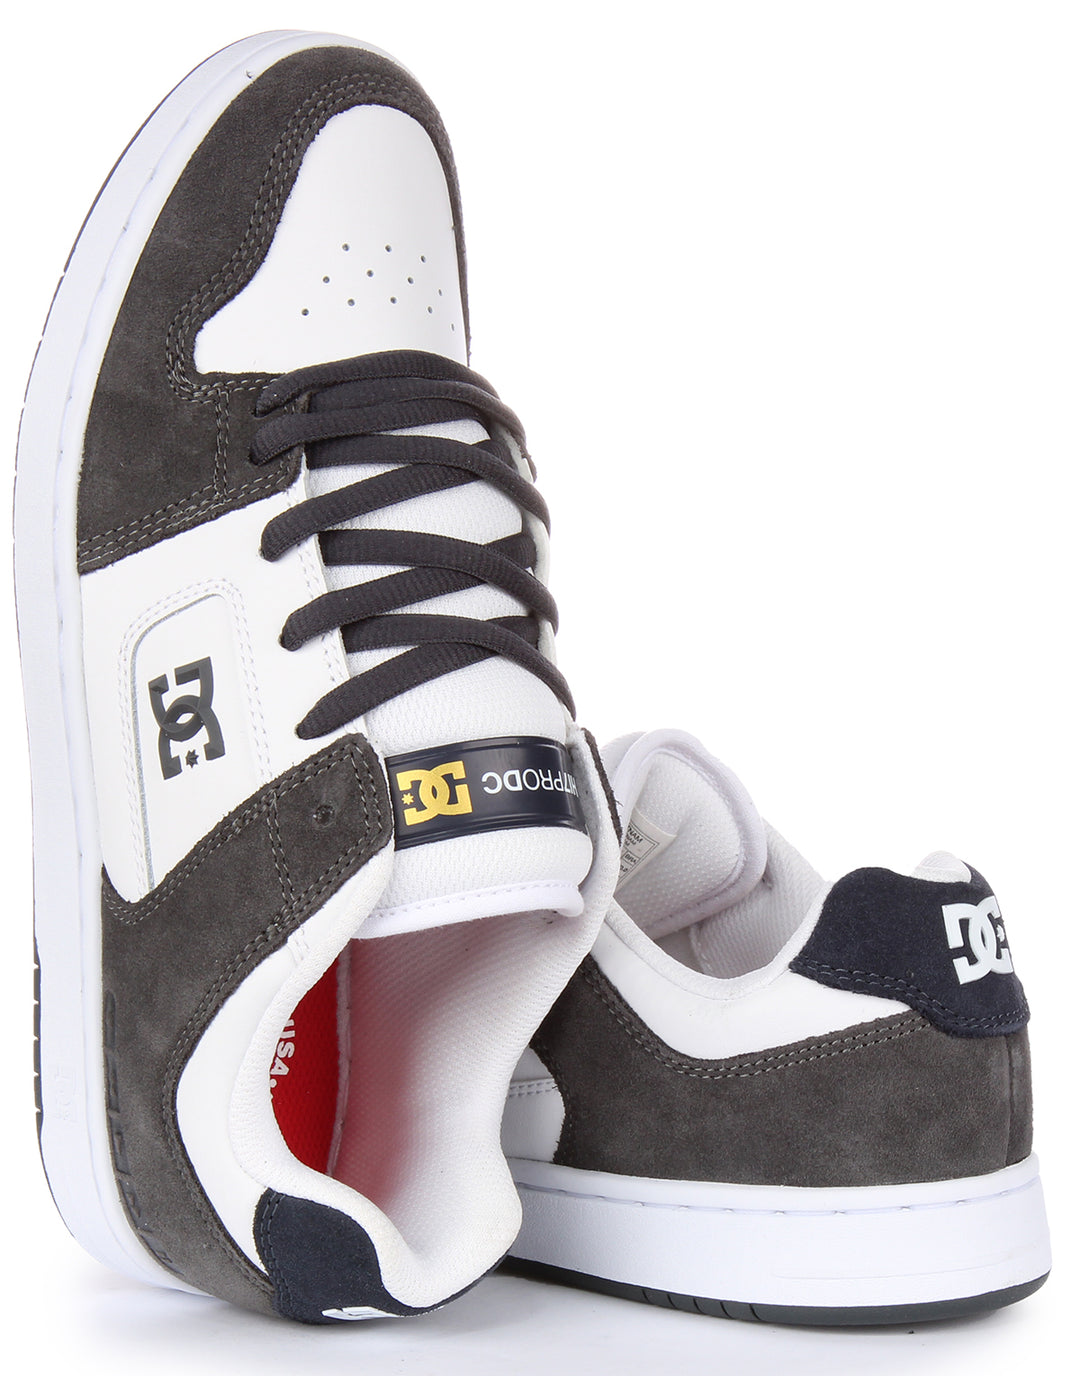 Dc Shoes Manteca 4 S In White Grey